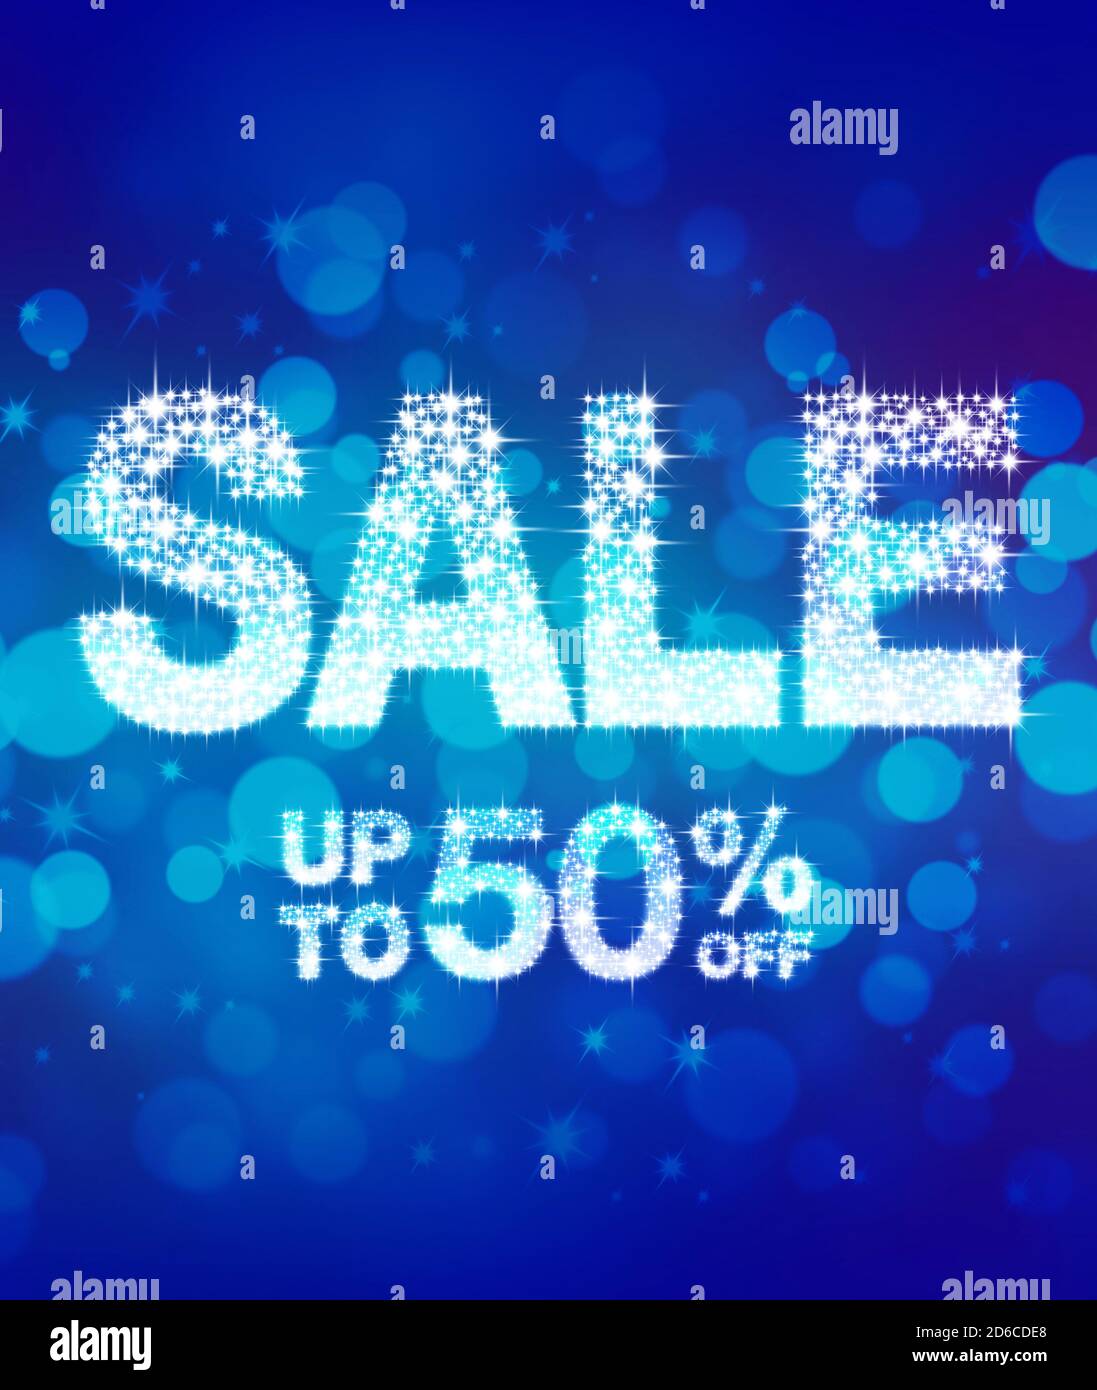 Sale up to 50 percent off poster Stock Photo